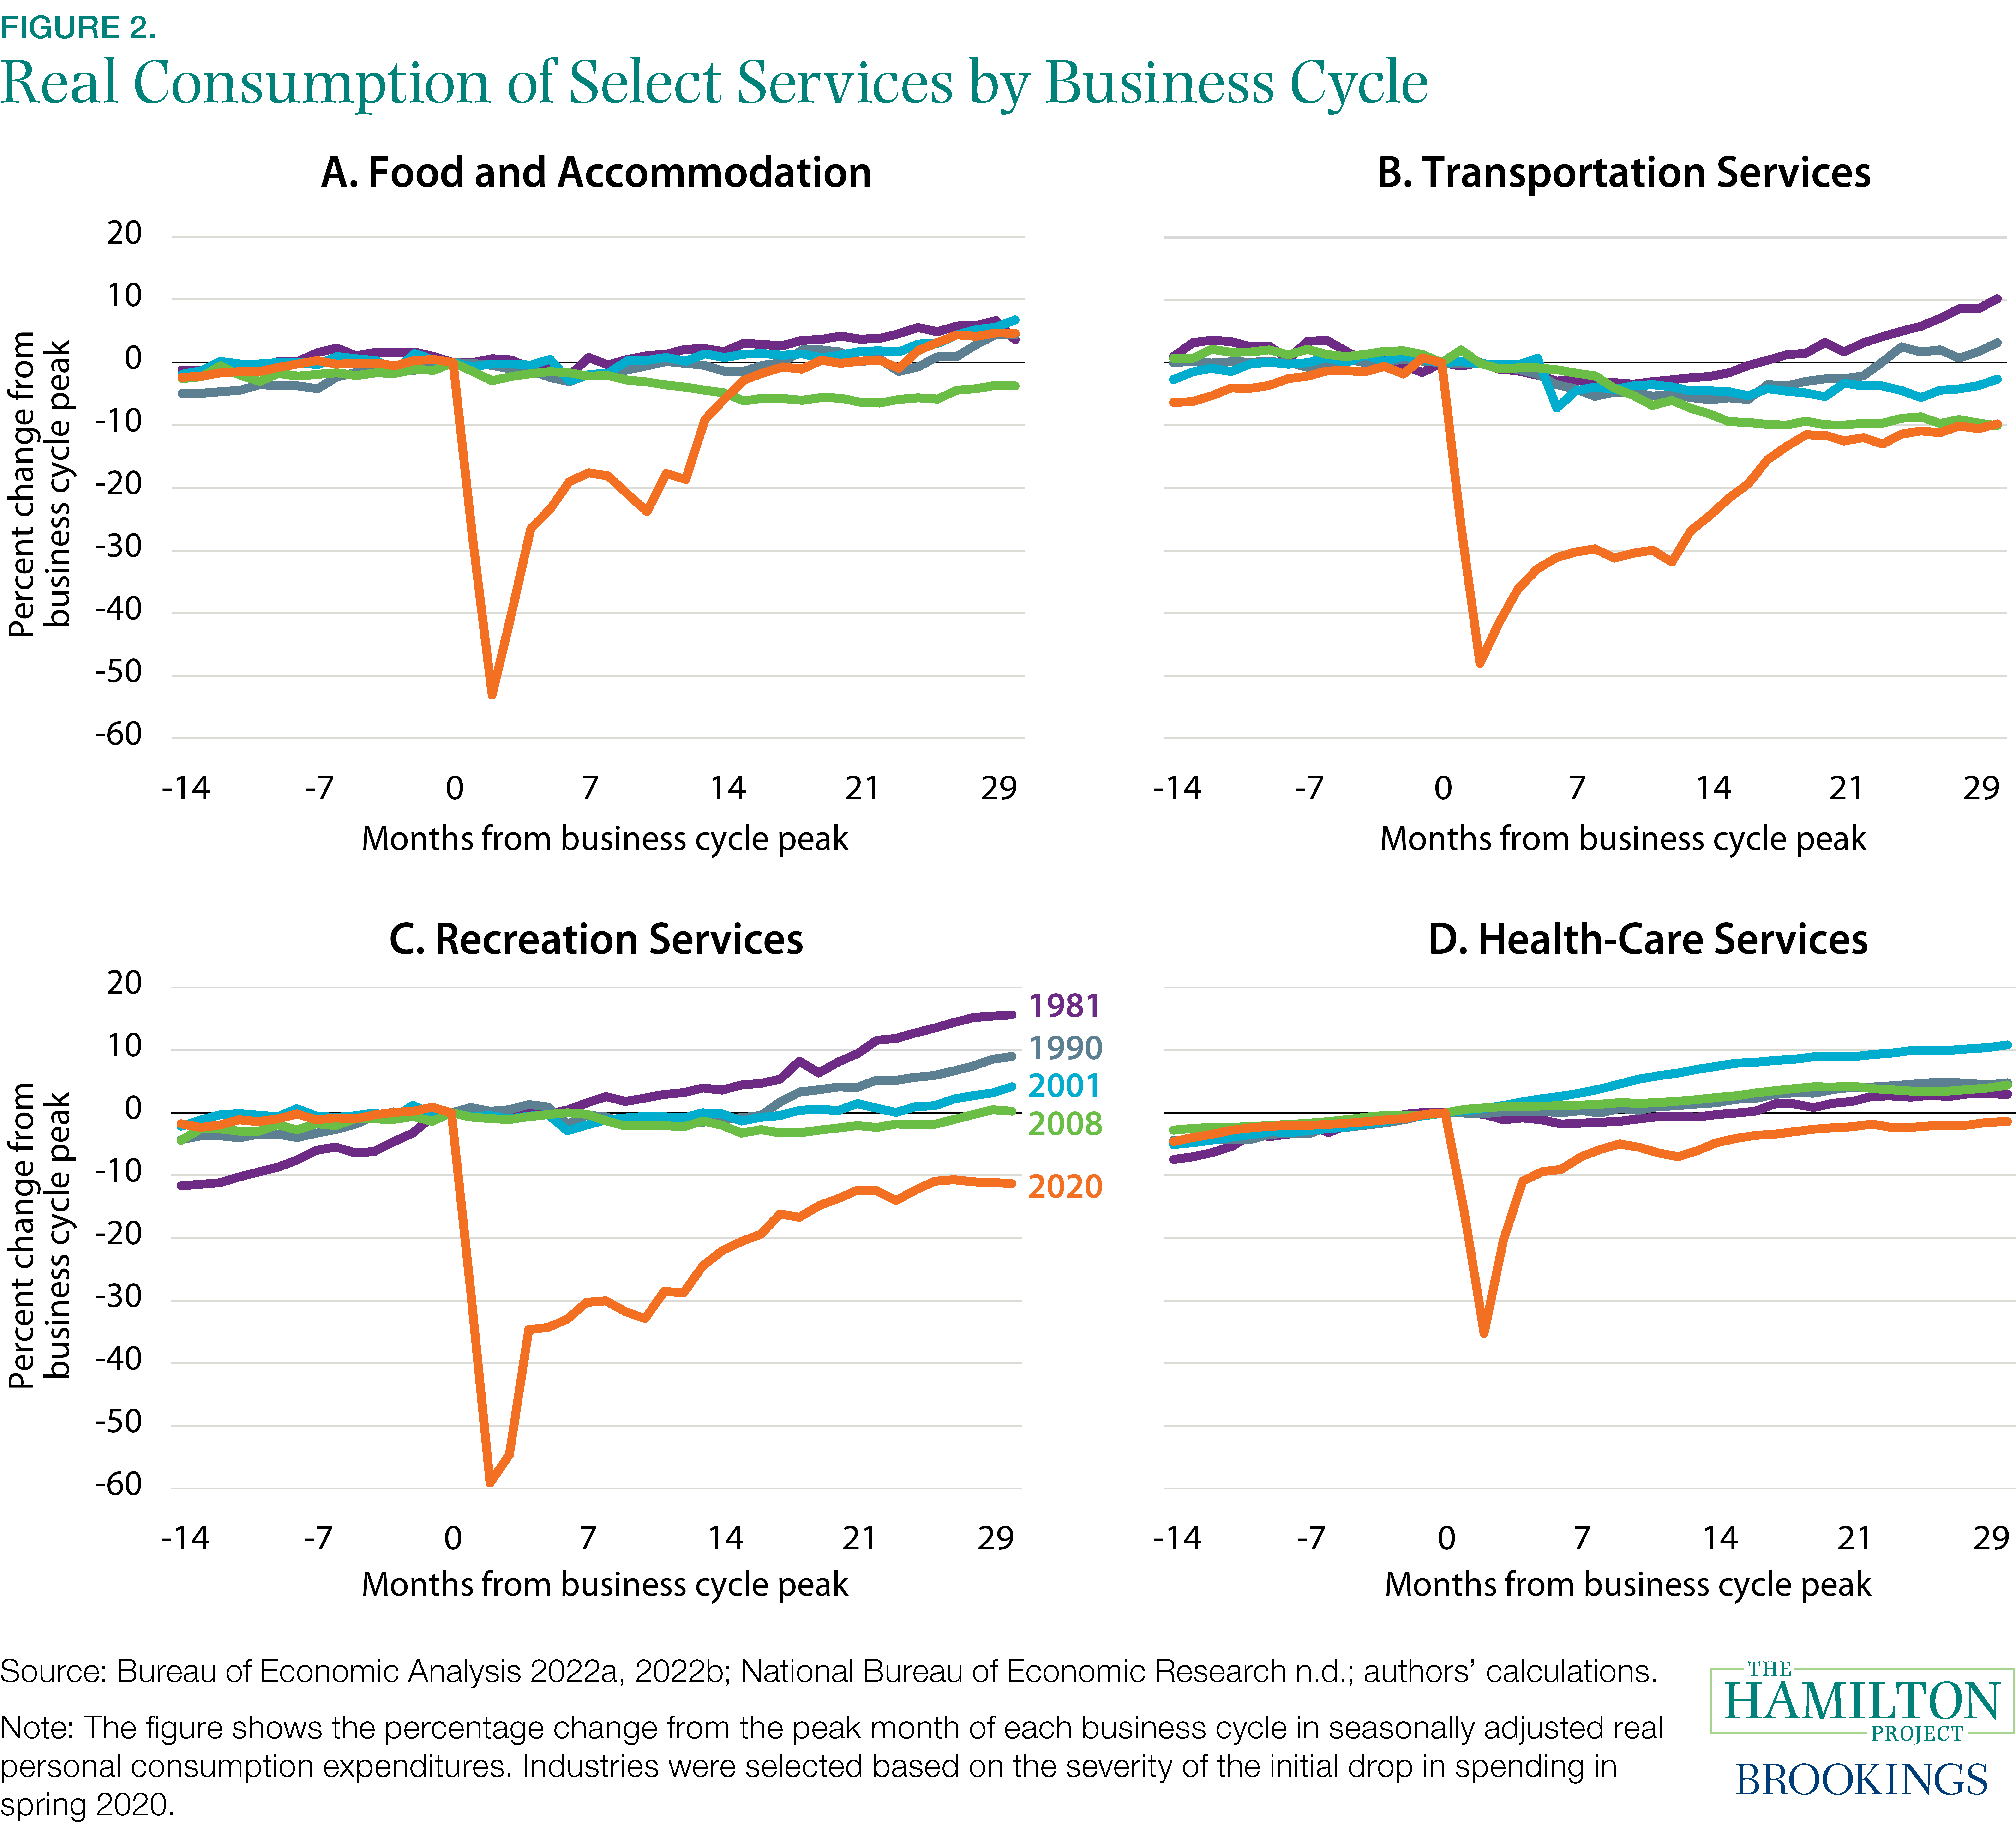 Figure 2. Real Consumption of Select Services by Business Cycle